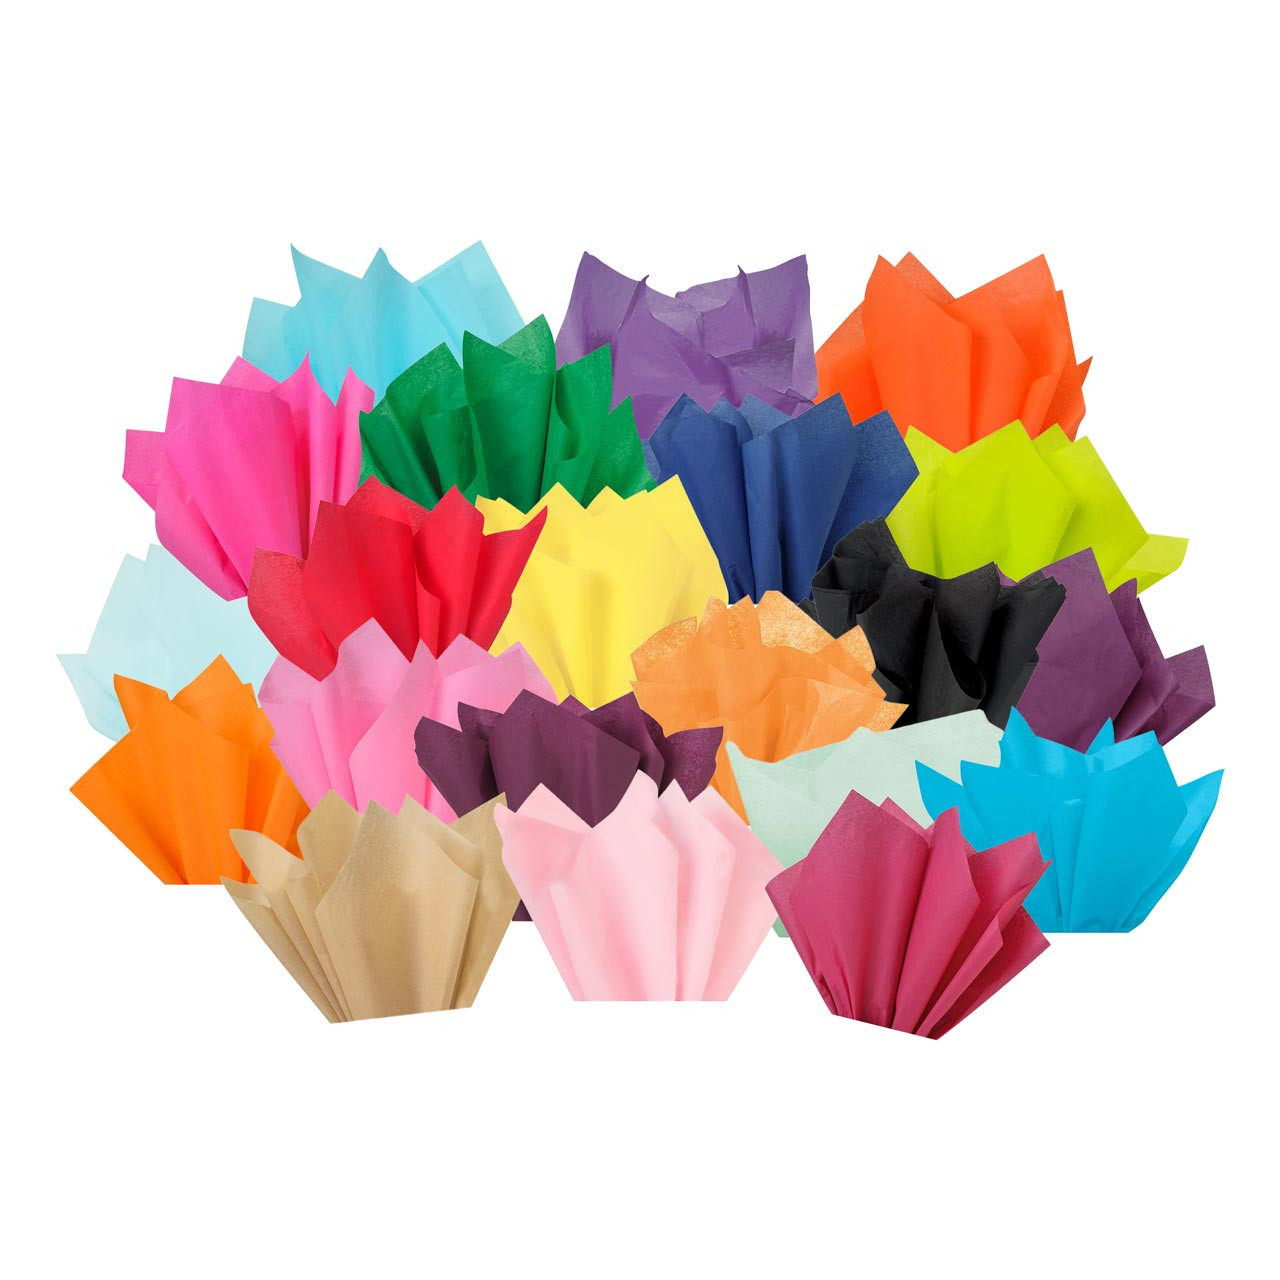 50 sheets tissue paper 30 x 20 inch PLENTY OF COLOURS STOCKED 